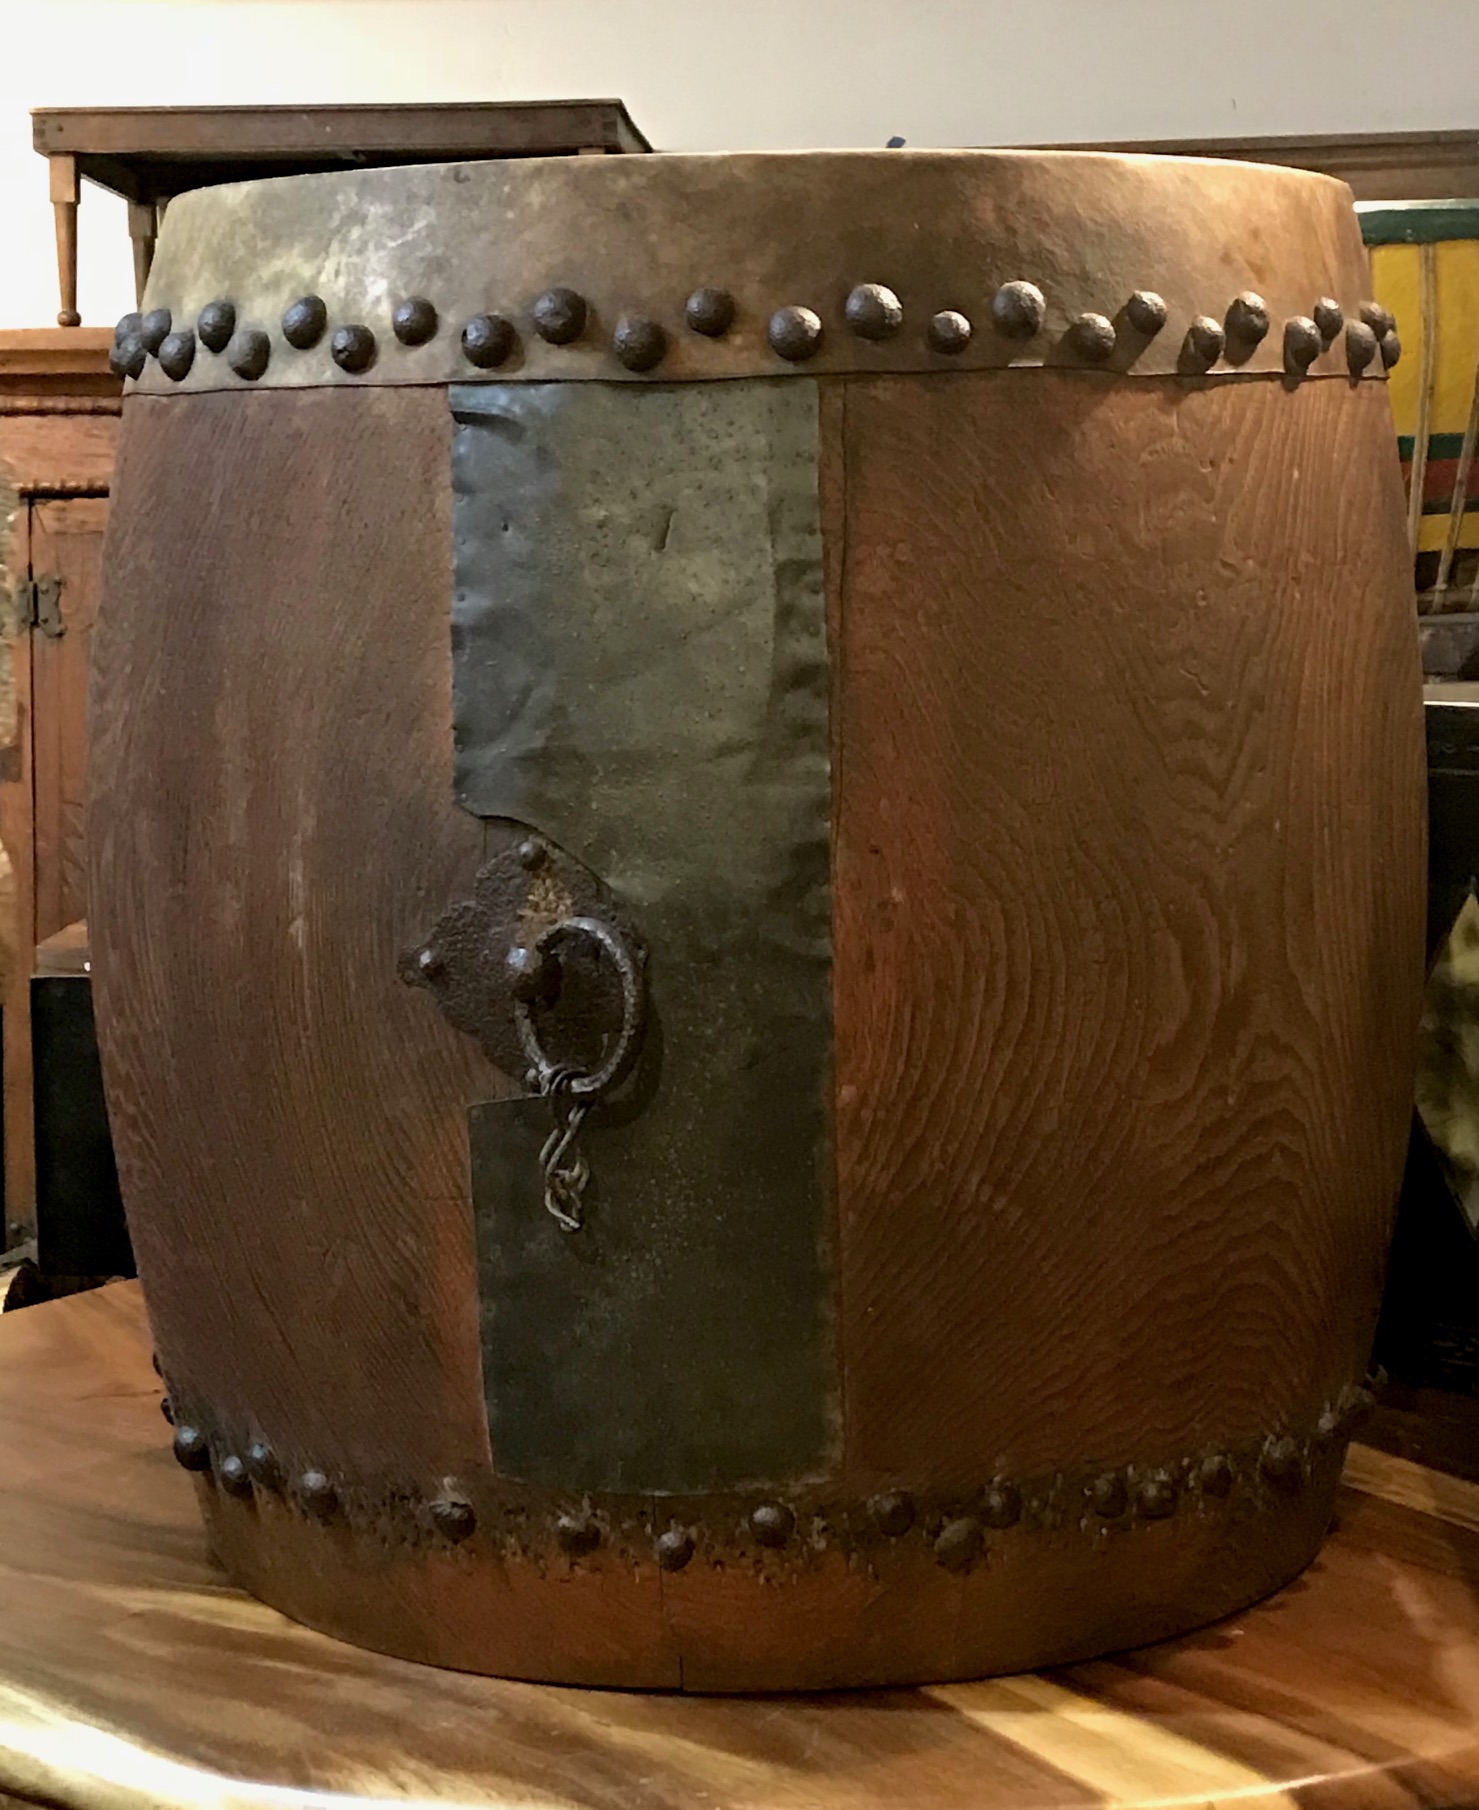 Musical Instrument, Edo period Taiko Buddhist Drum, Japan, 18th c, keyaki wood (Japanese red elm), metal panel on side, metal tacks on rawhide skin (missing center of drum head skin on both sides) Metal ring with rope for carrying, 29 1/2" x 34", $2800. thedavidalancollection.com , solana beach, ca